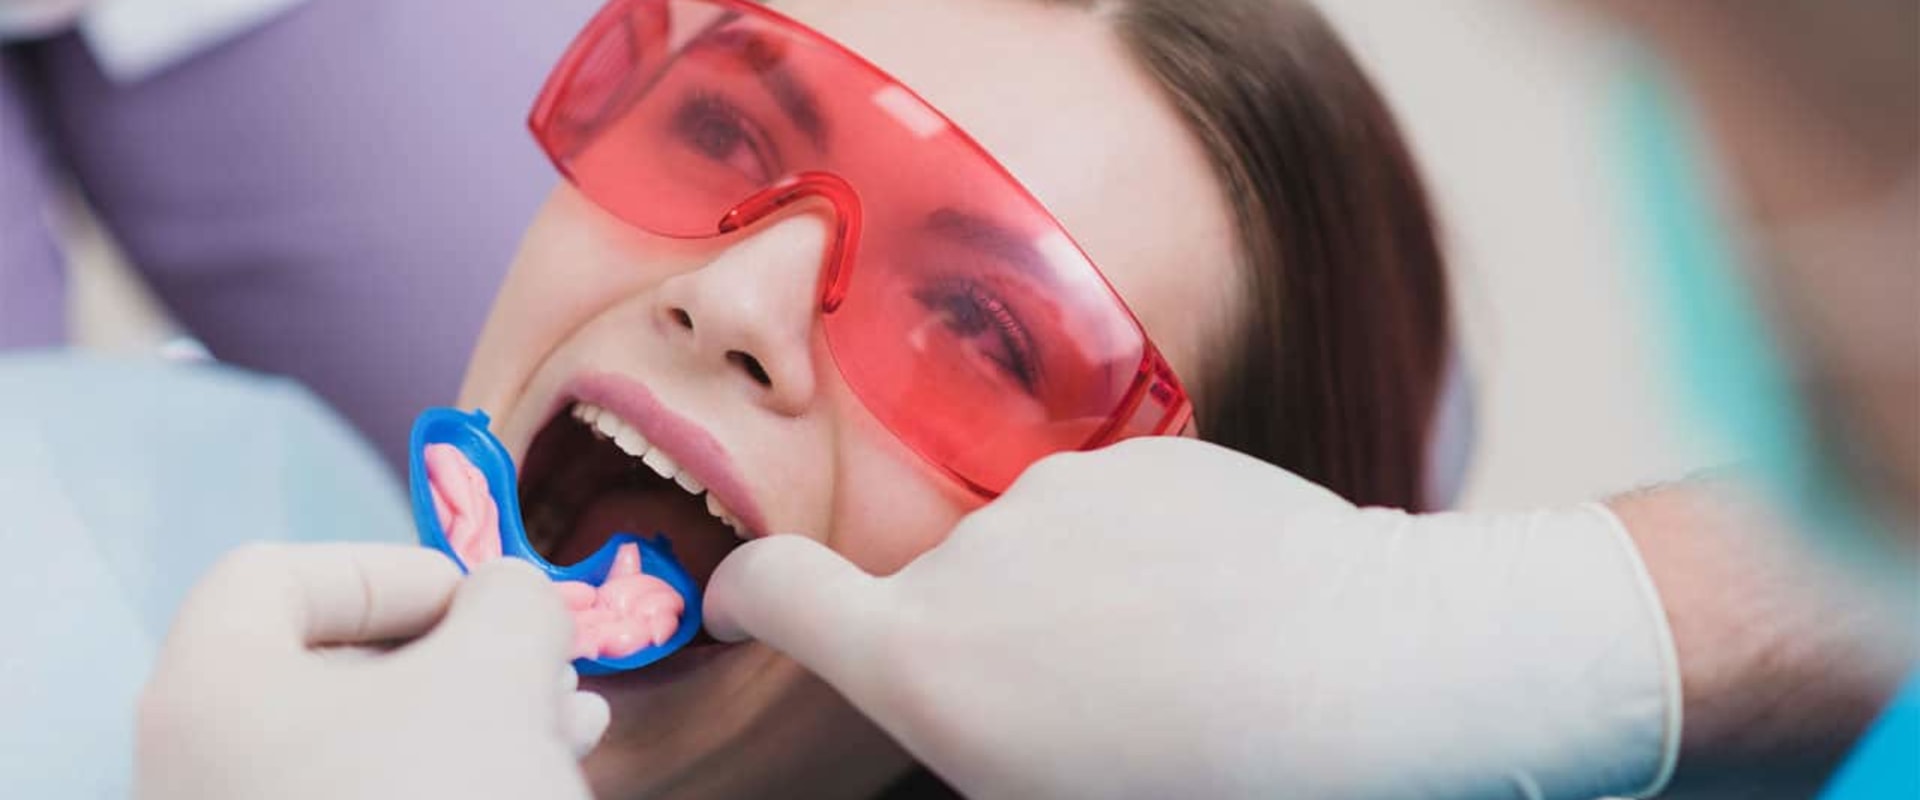 Preventive Measures for Maintaining Good Oral Health